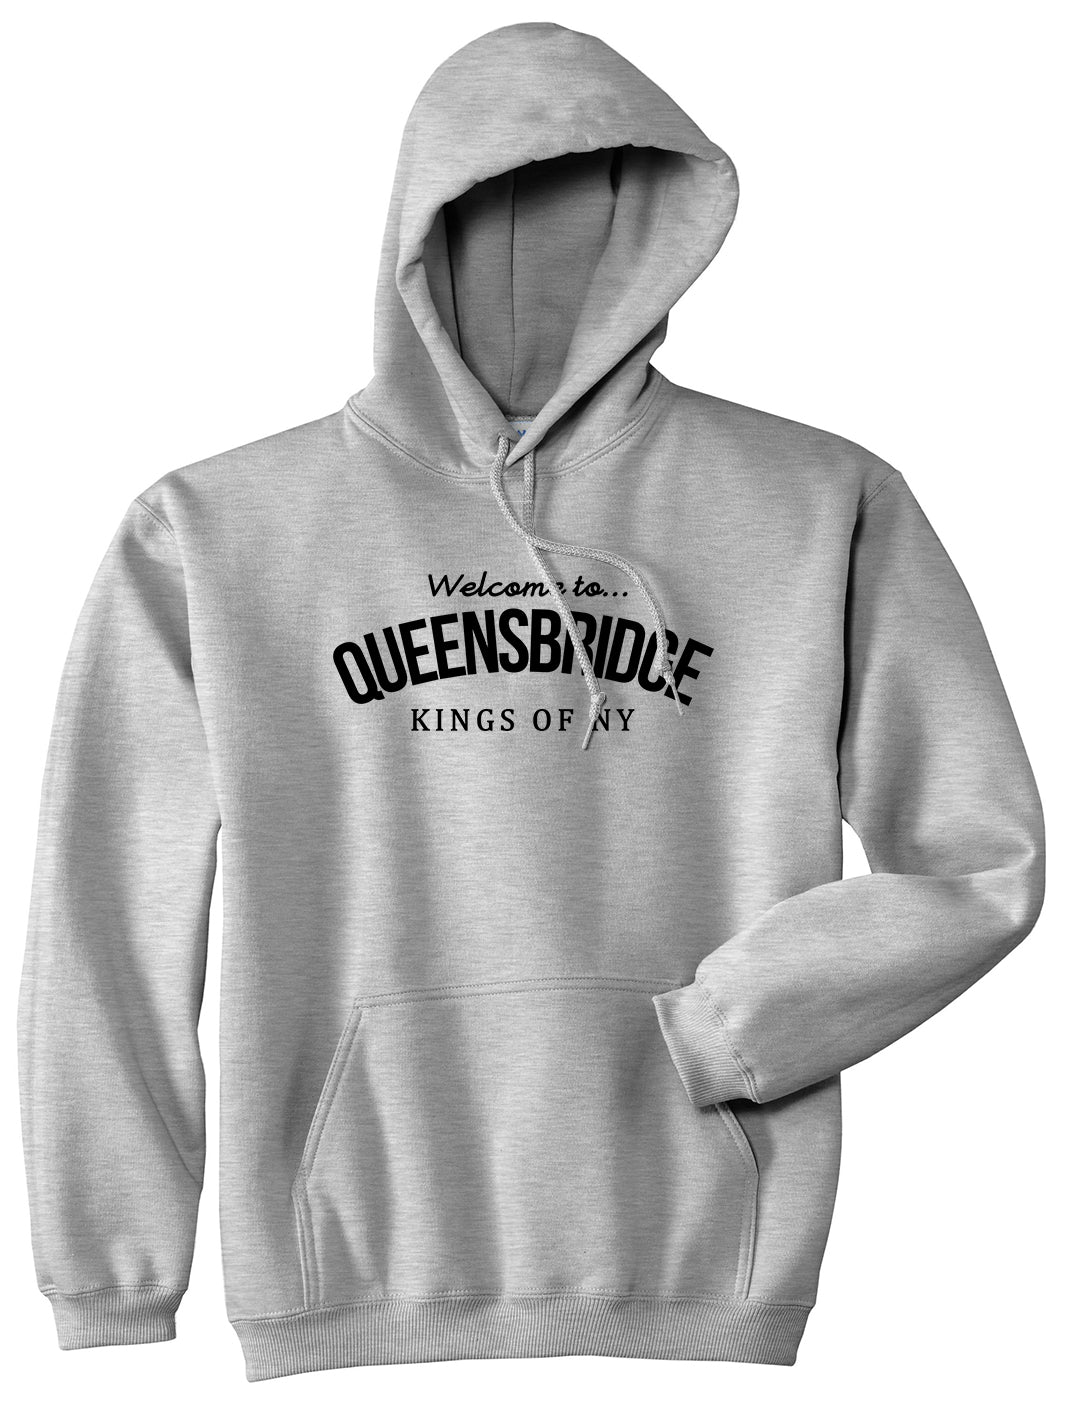 Welcome To Queensbridge Mens Pullover Hoodie Grey by Kings Of NY